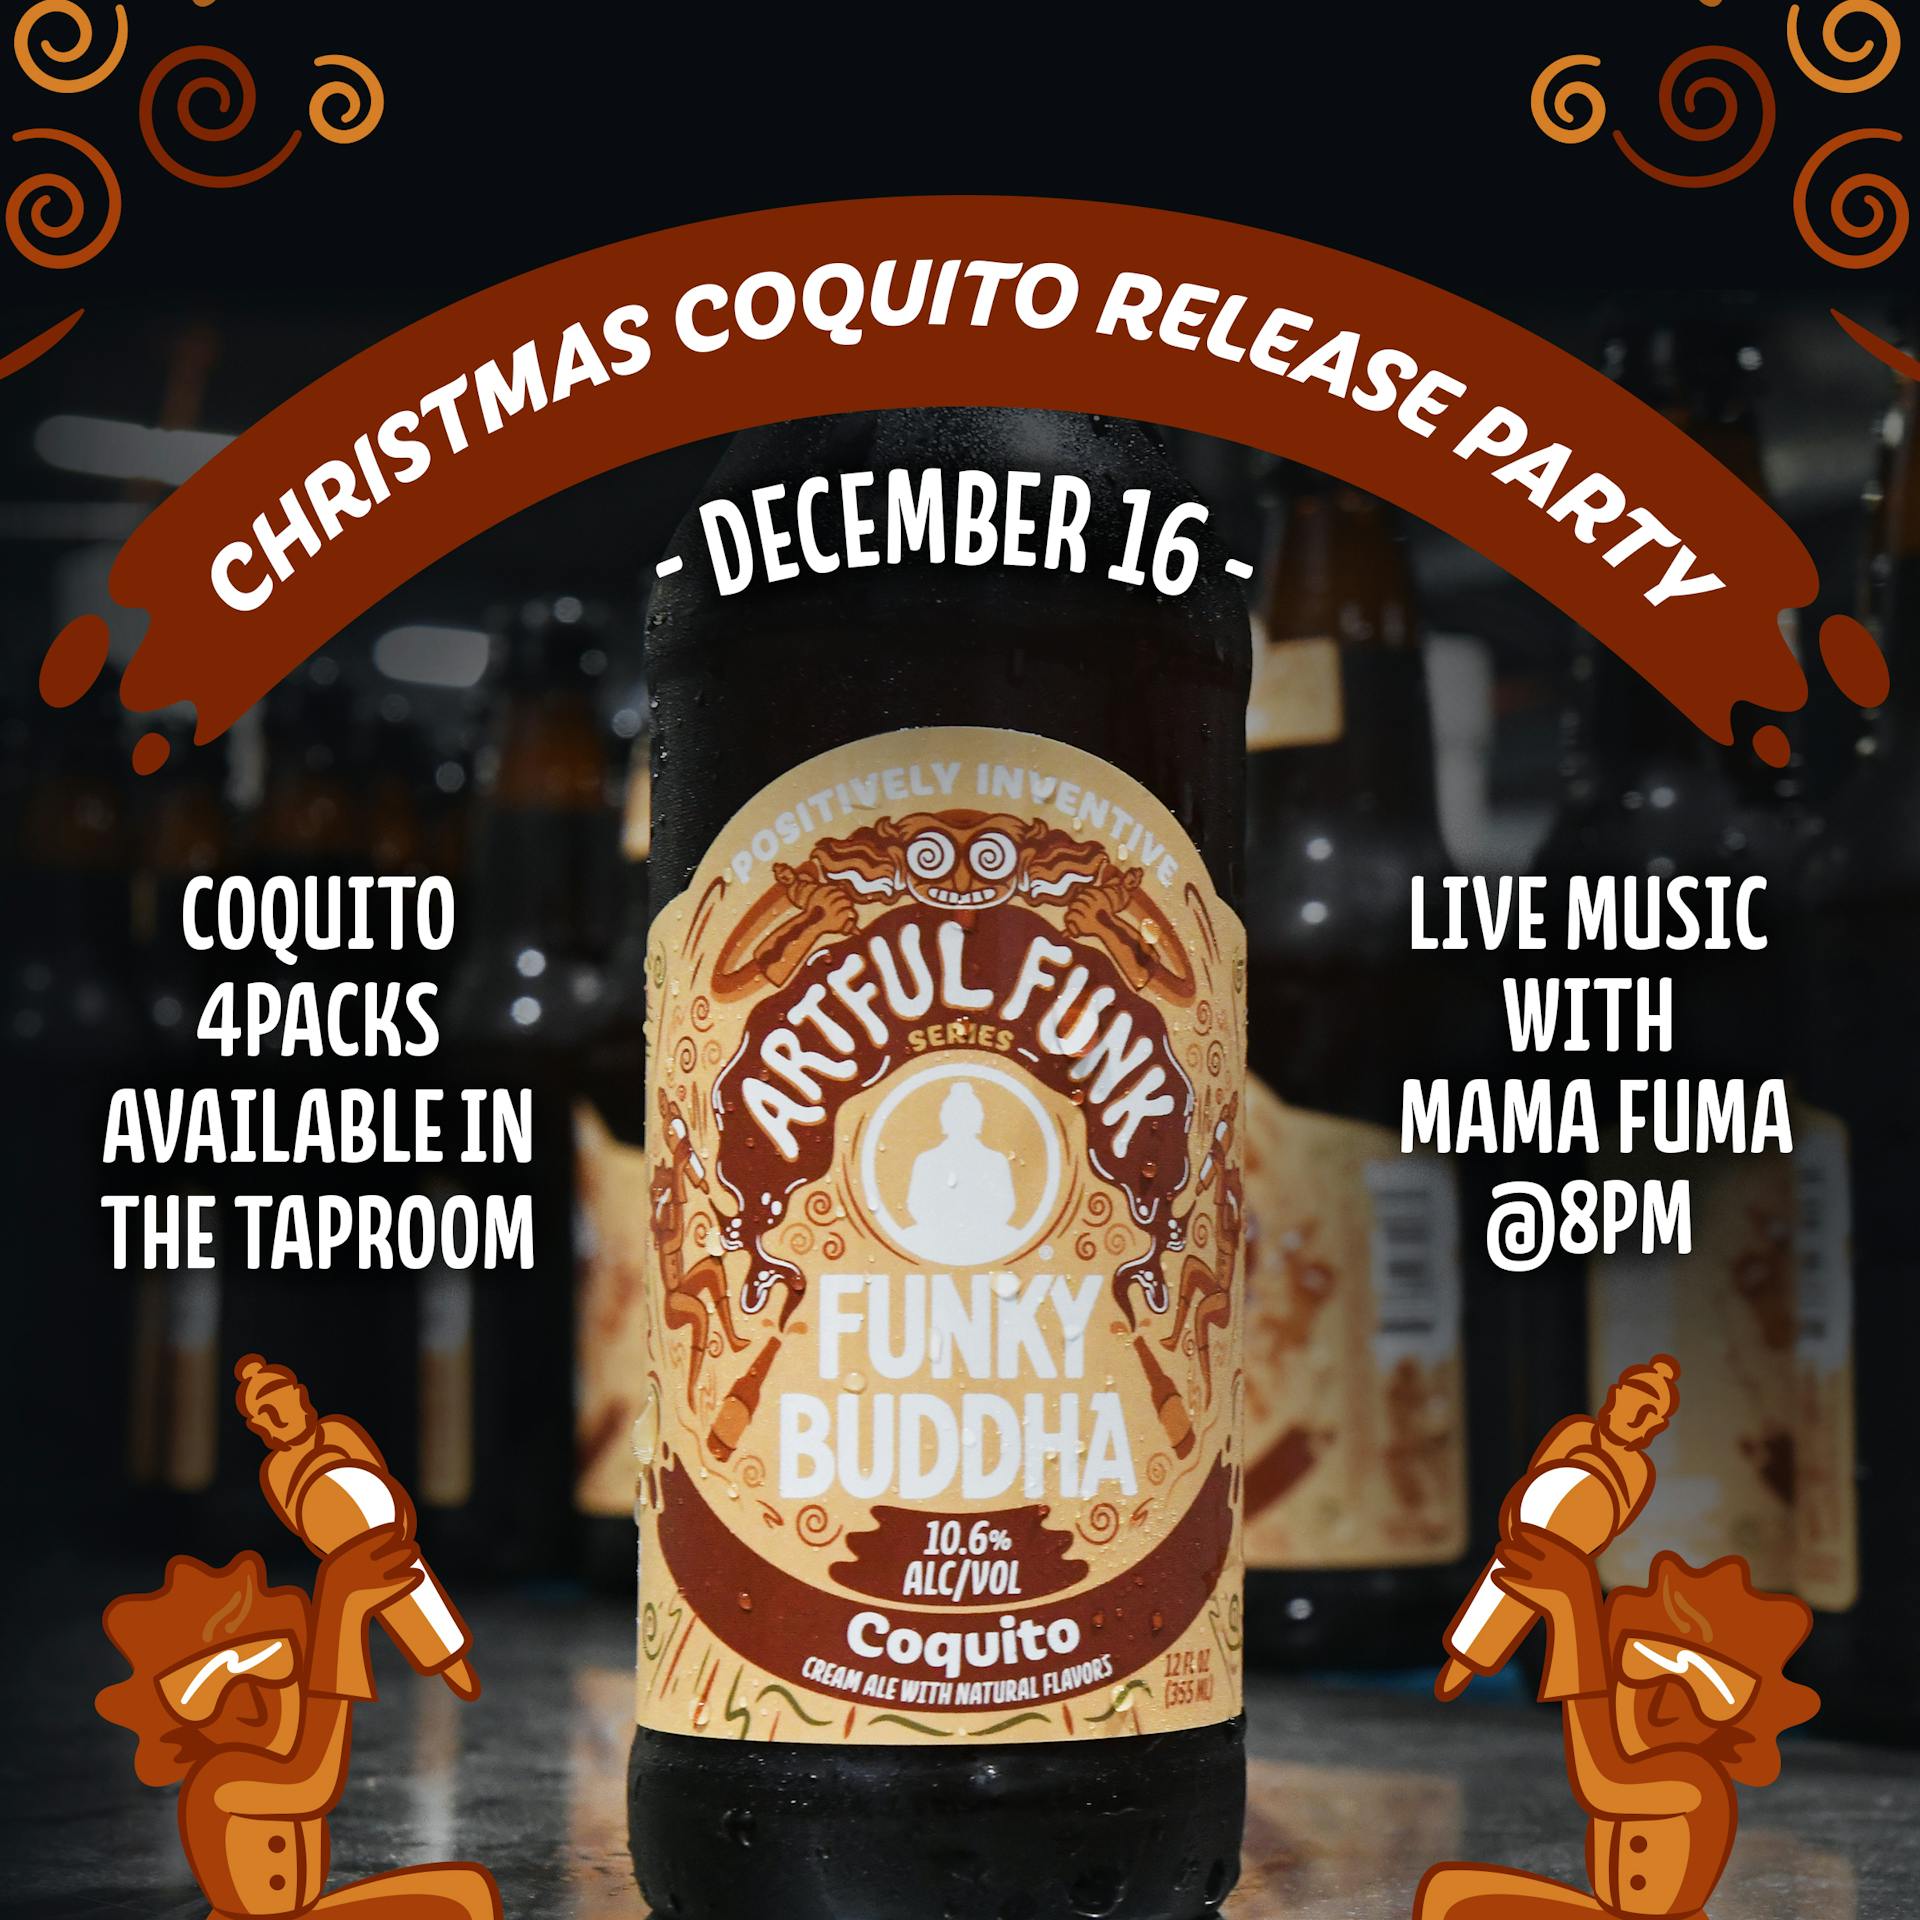 Christmas Coquito Release party